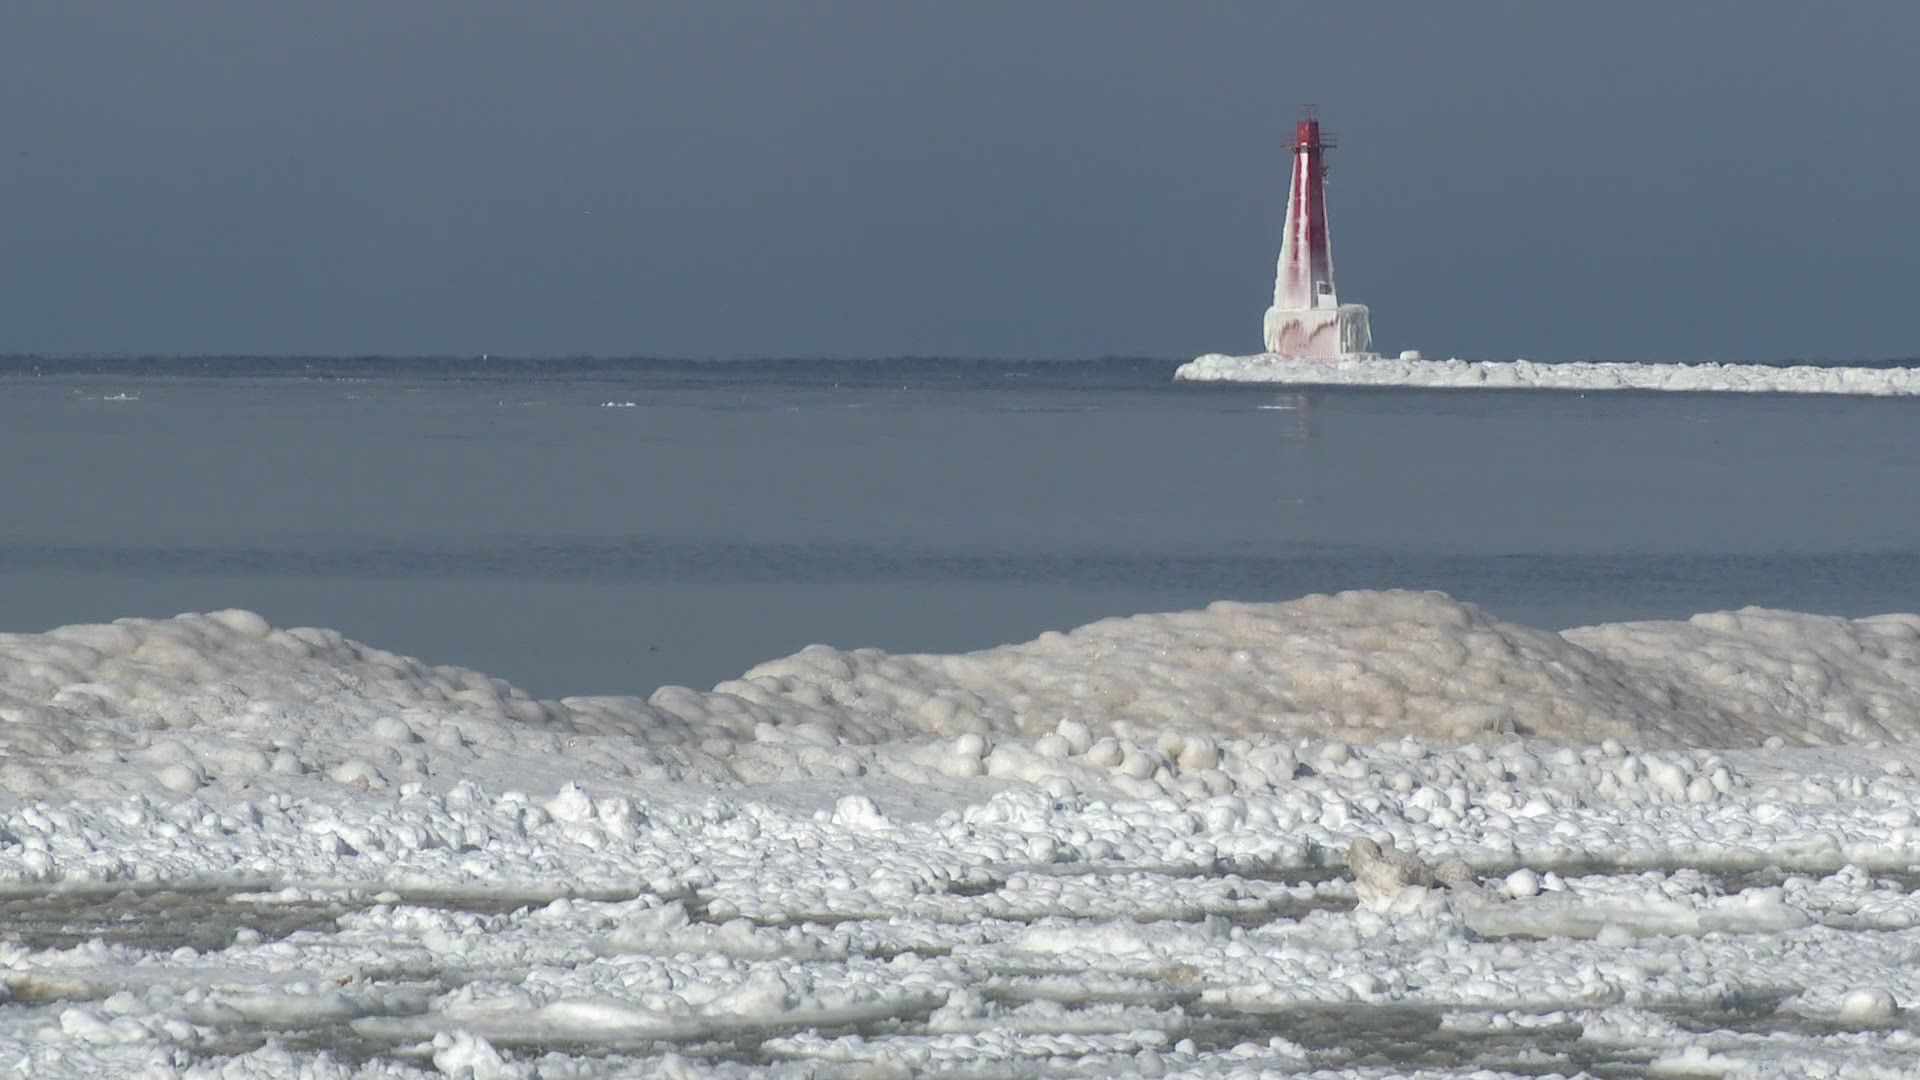 While it may be tempting to go onto shelf ice along the shore of Lake Michigan, it can be very dangerous.